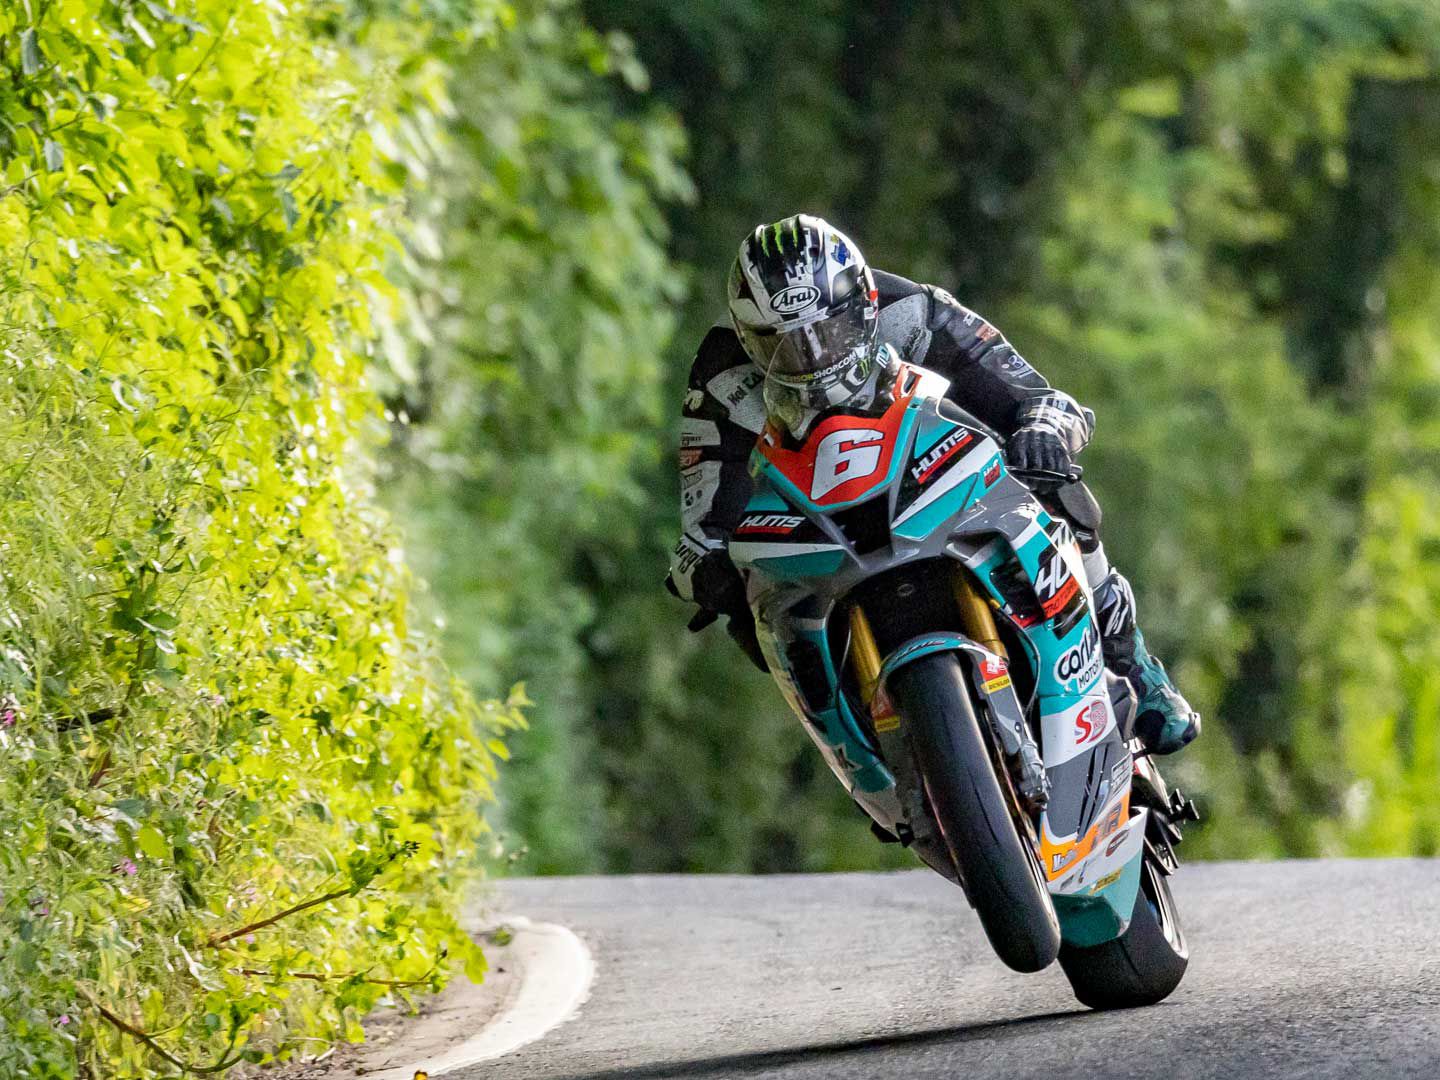 Michael Dunlop on his Superstock Suzuki 1000 tops 127 mph in Thursday’s qualifying session.